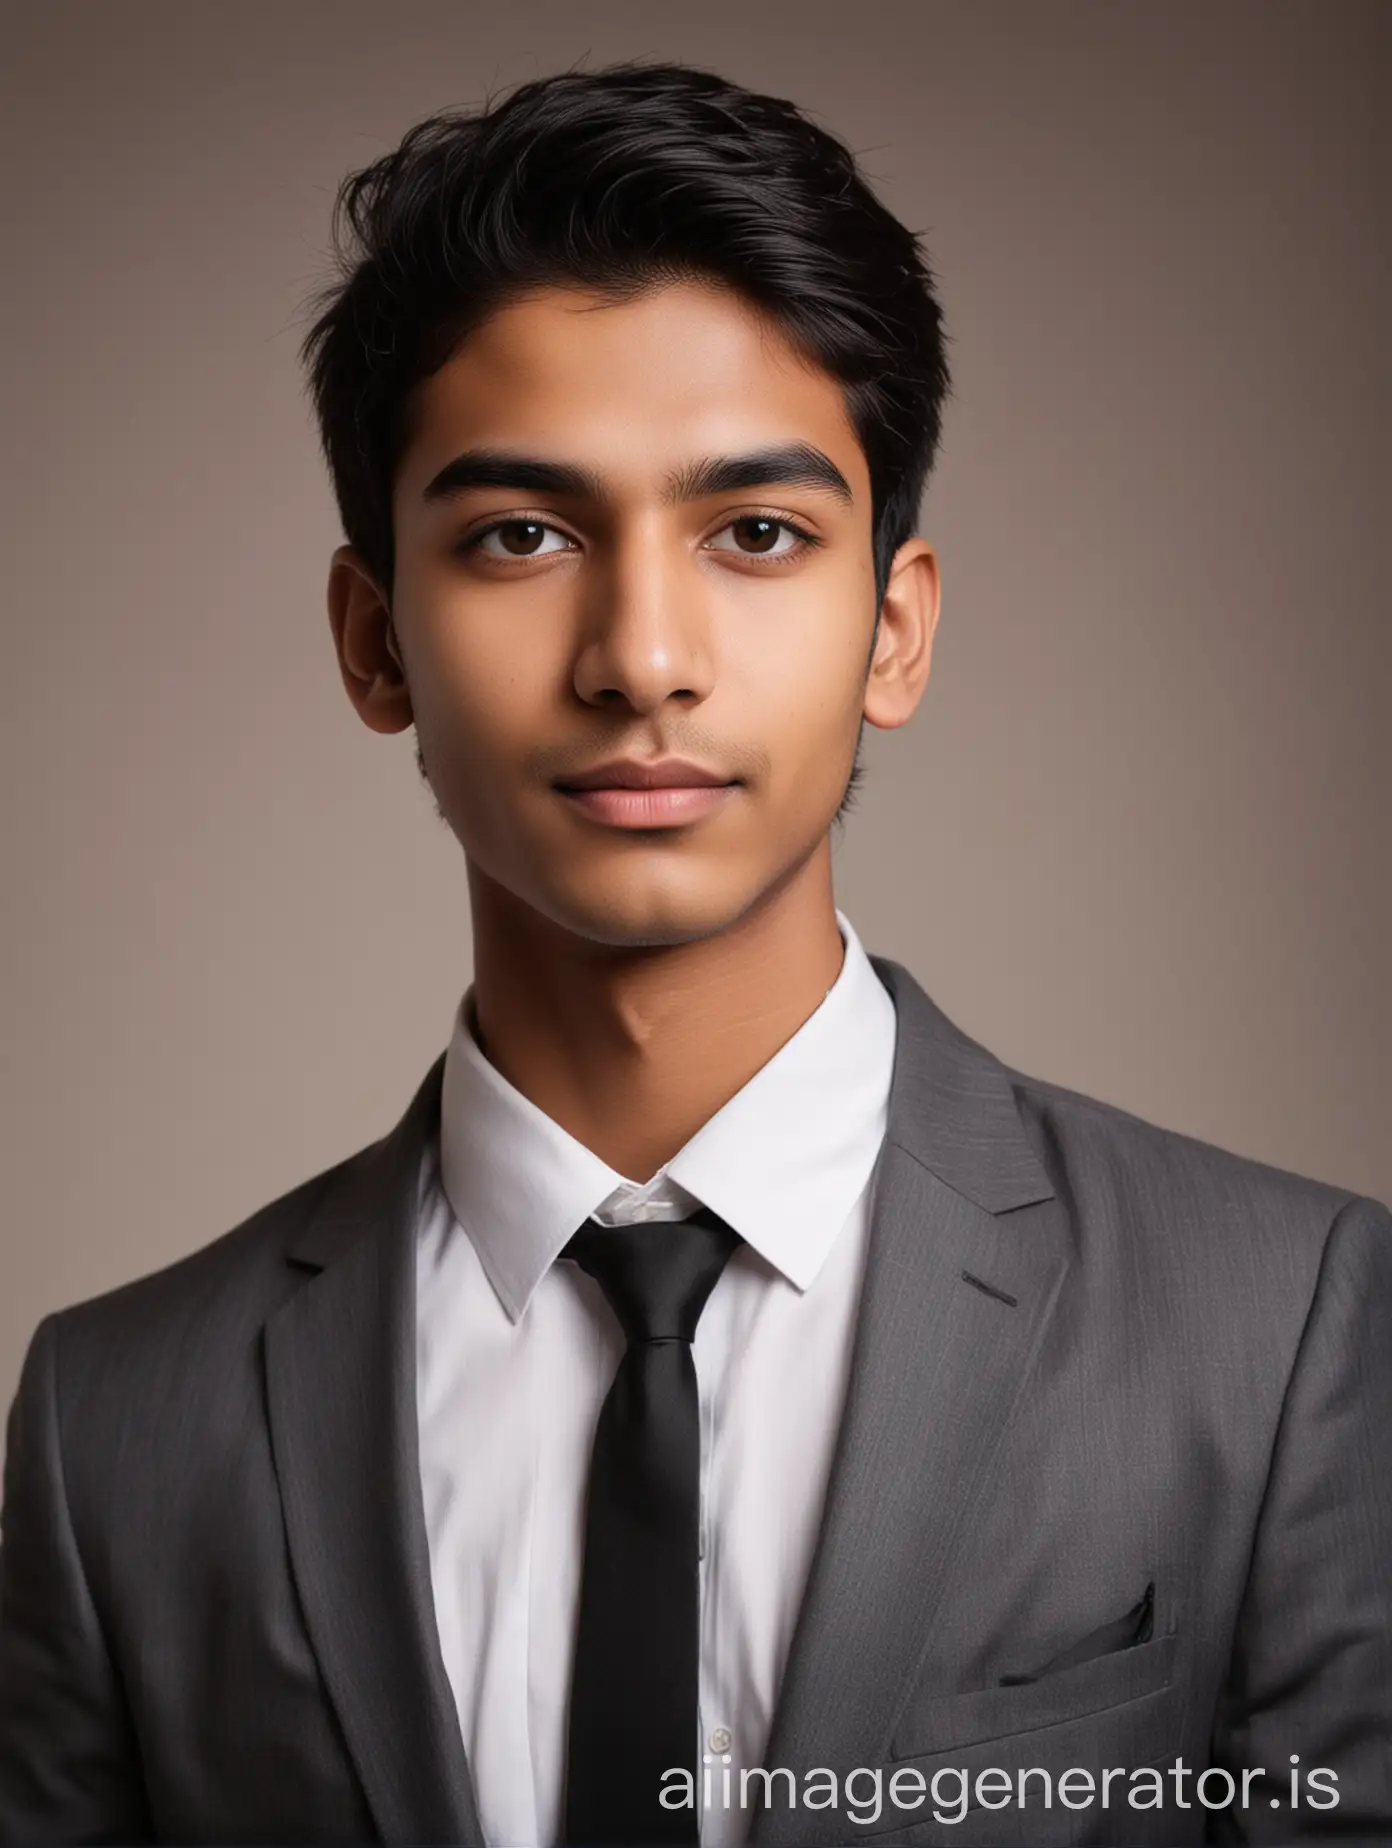 20 year old indian boy With fair skin narrow body Posing for a linkedin picture in formals formed light in background with minimal facial hairs